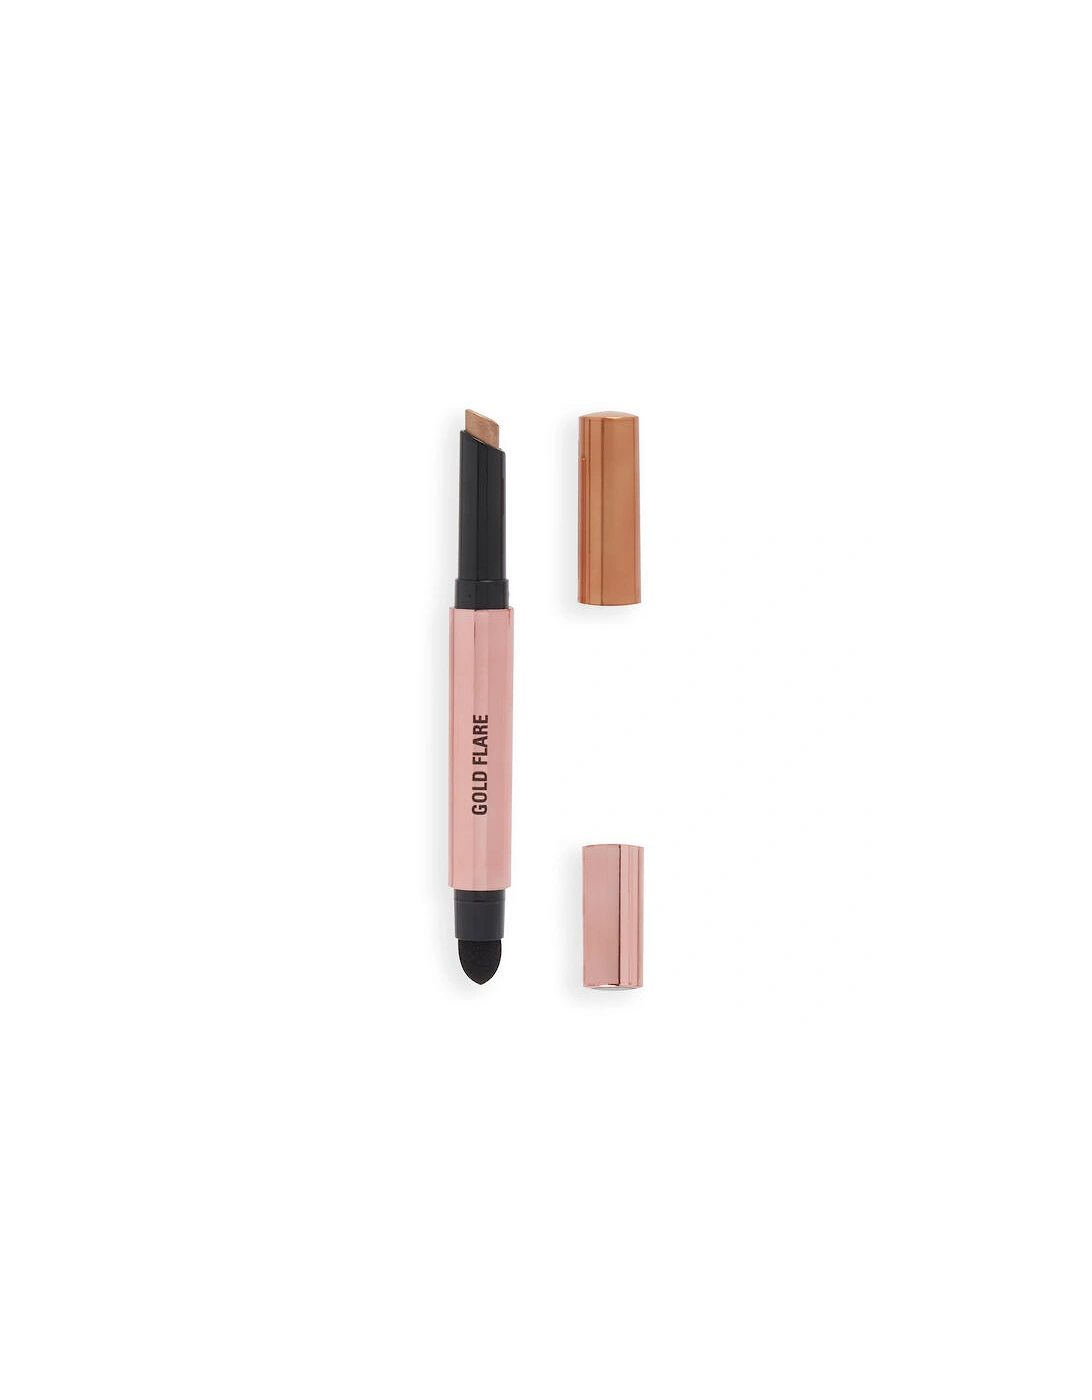 Makeup Lustre Wand Eyeshadow Stick Gold Flare, 2 of 1